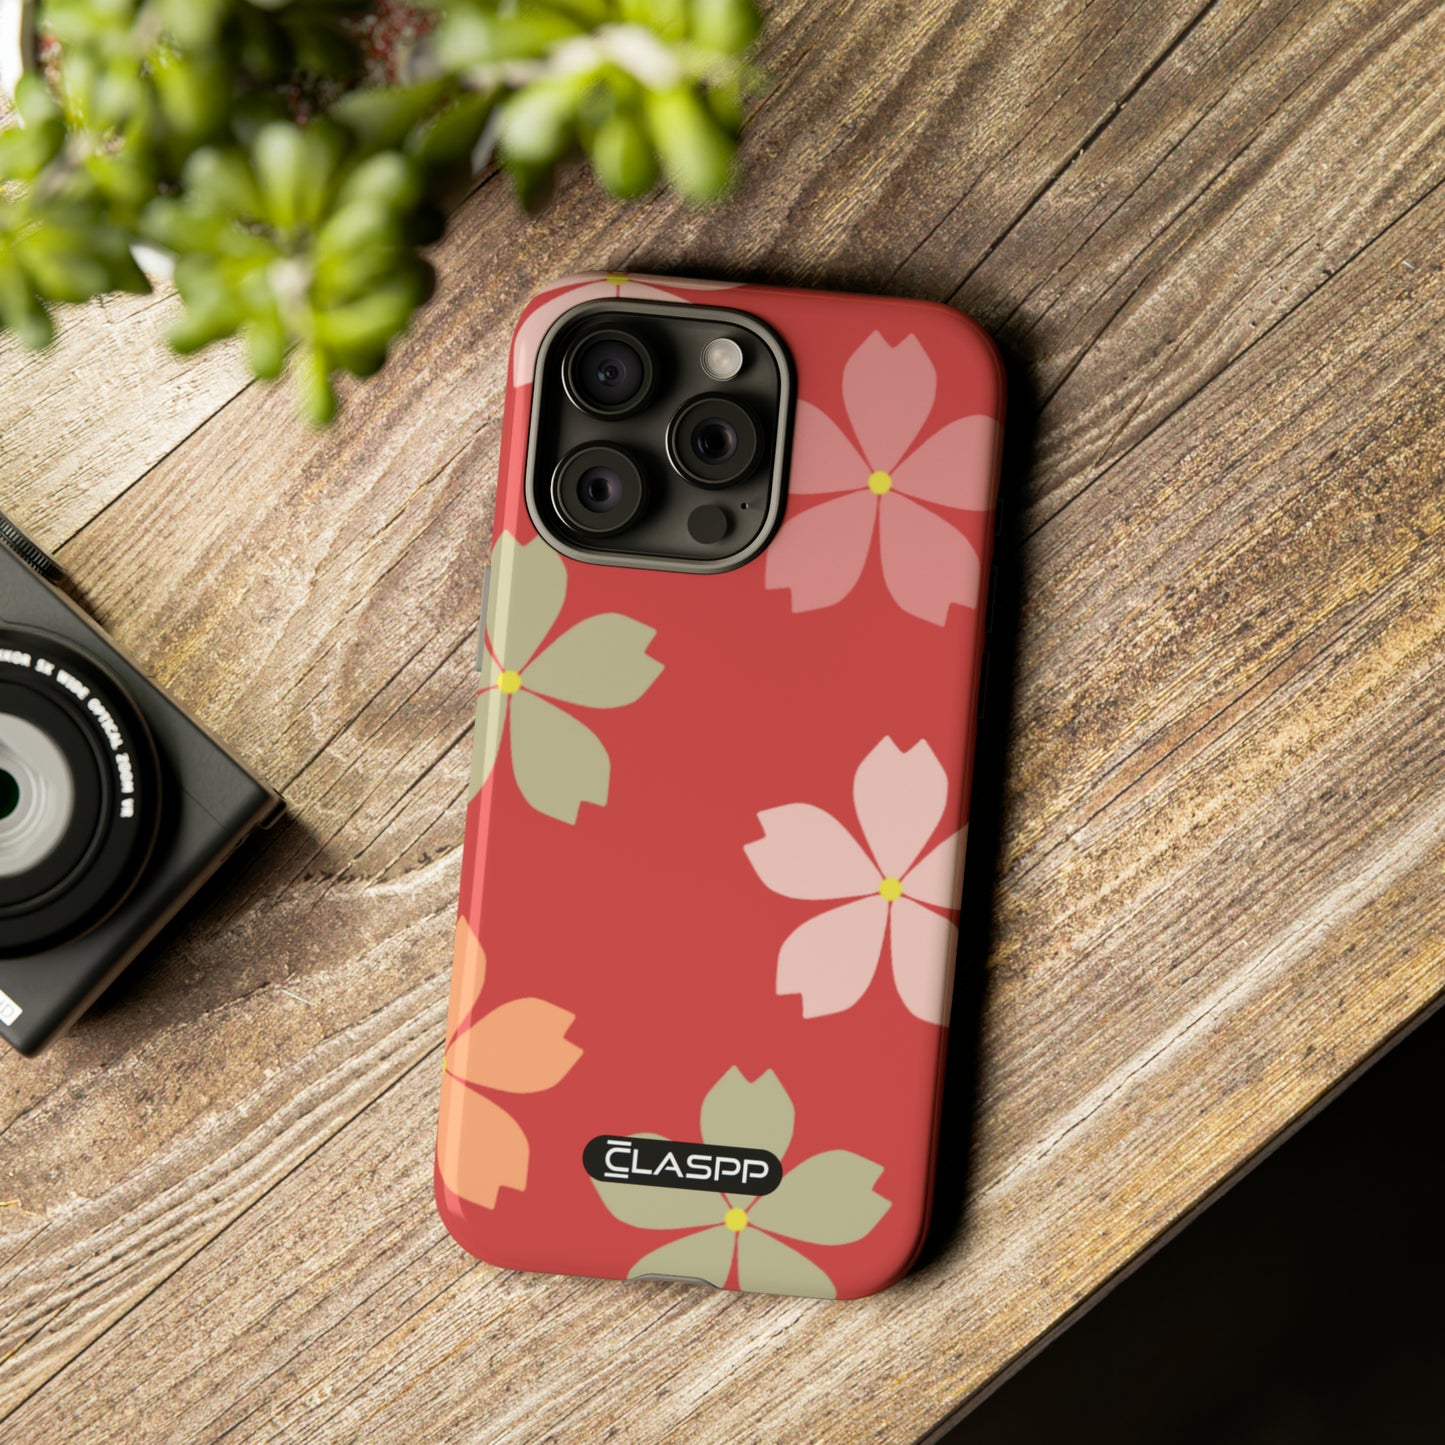 Floral Pastels | Hardshell Dual Layer Phone Case